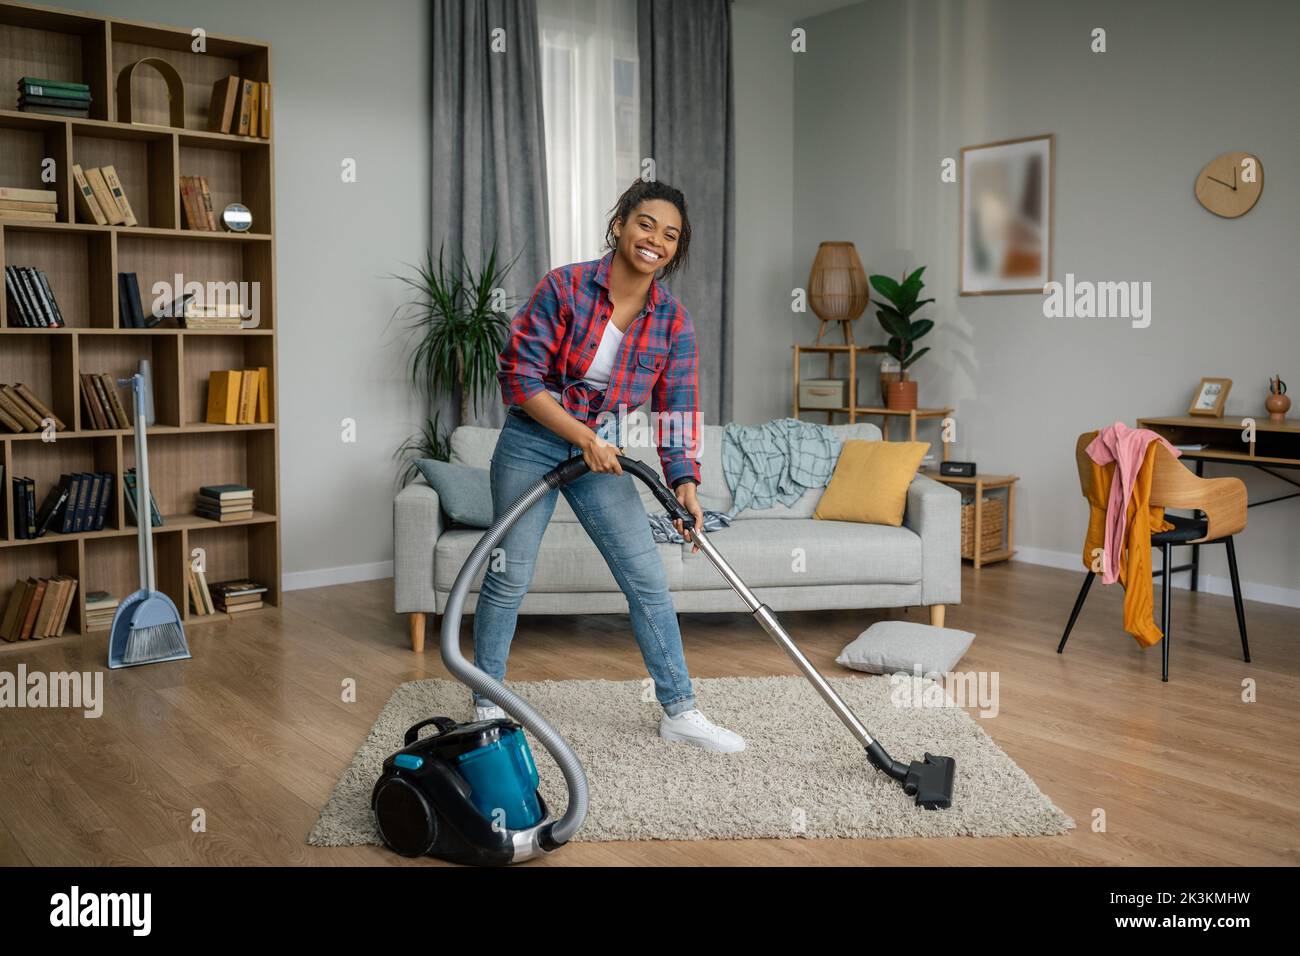 Smiling young black woman with vacuum cleaner dusts floor, enjoy cleaning alone in living room interior Stock Photo